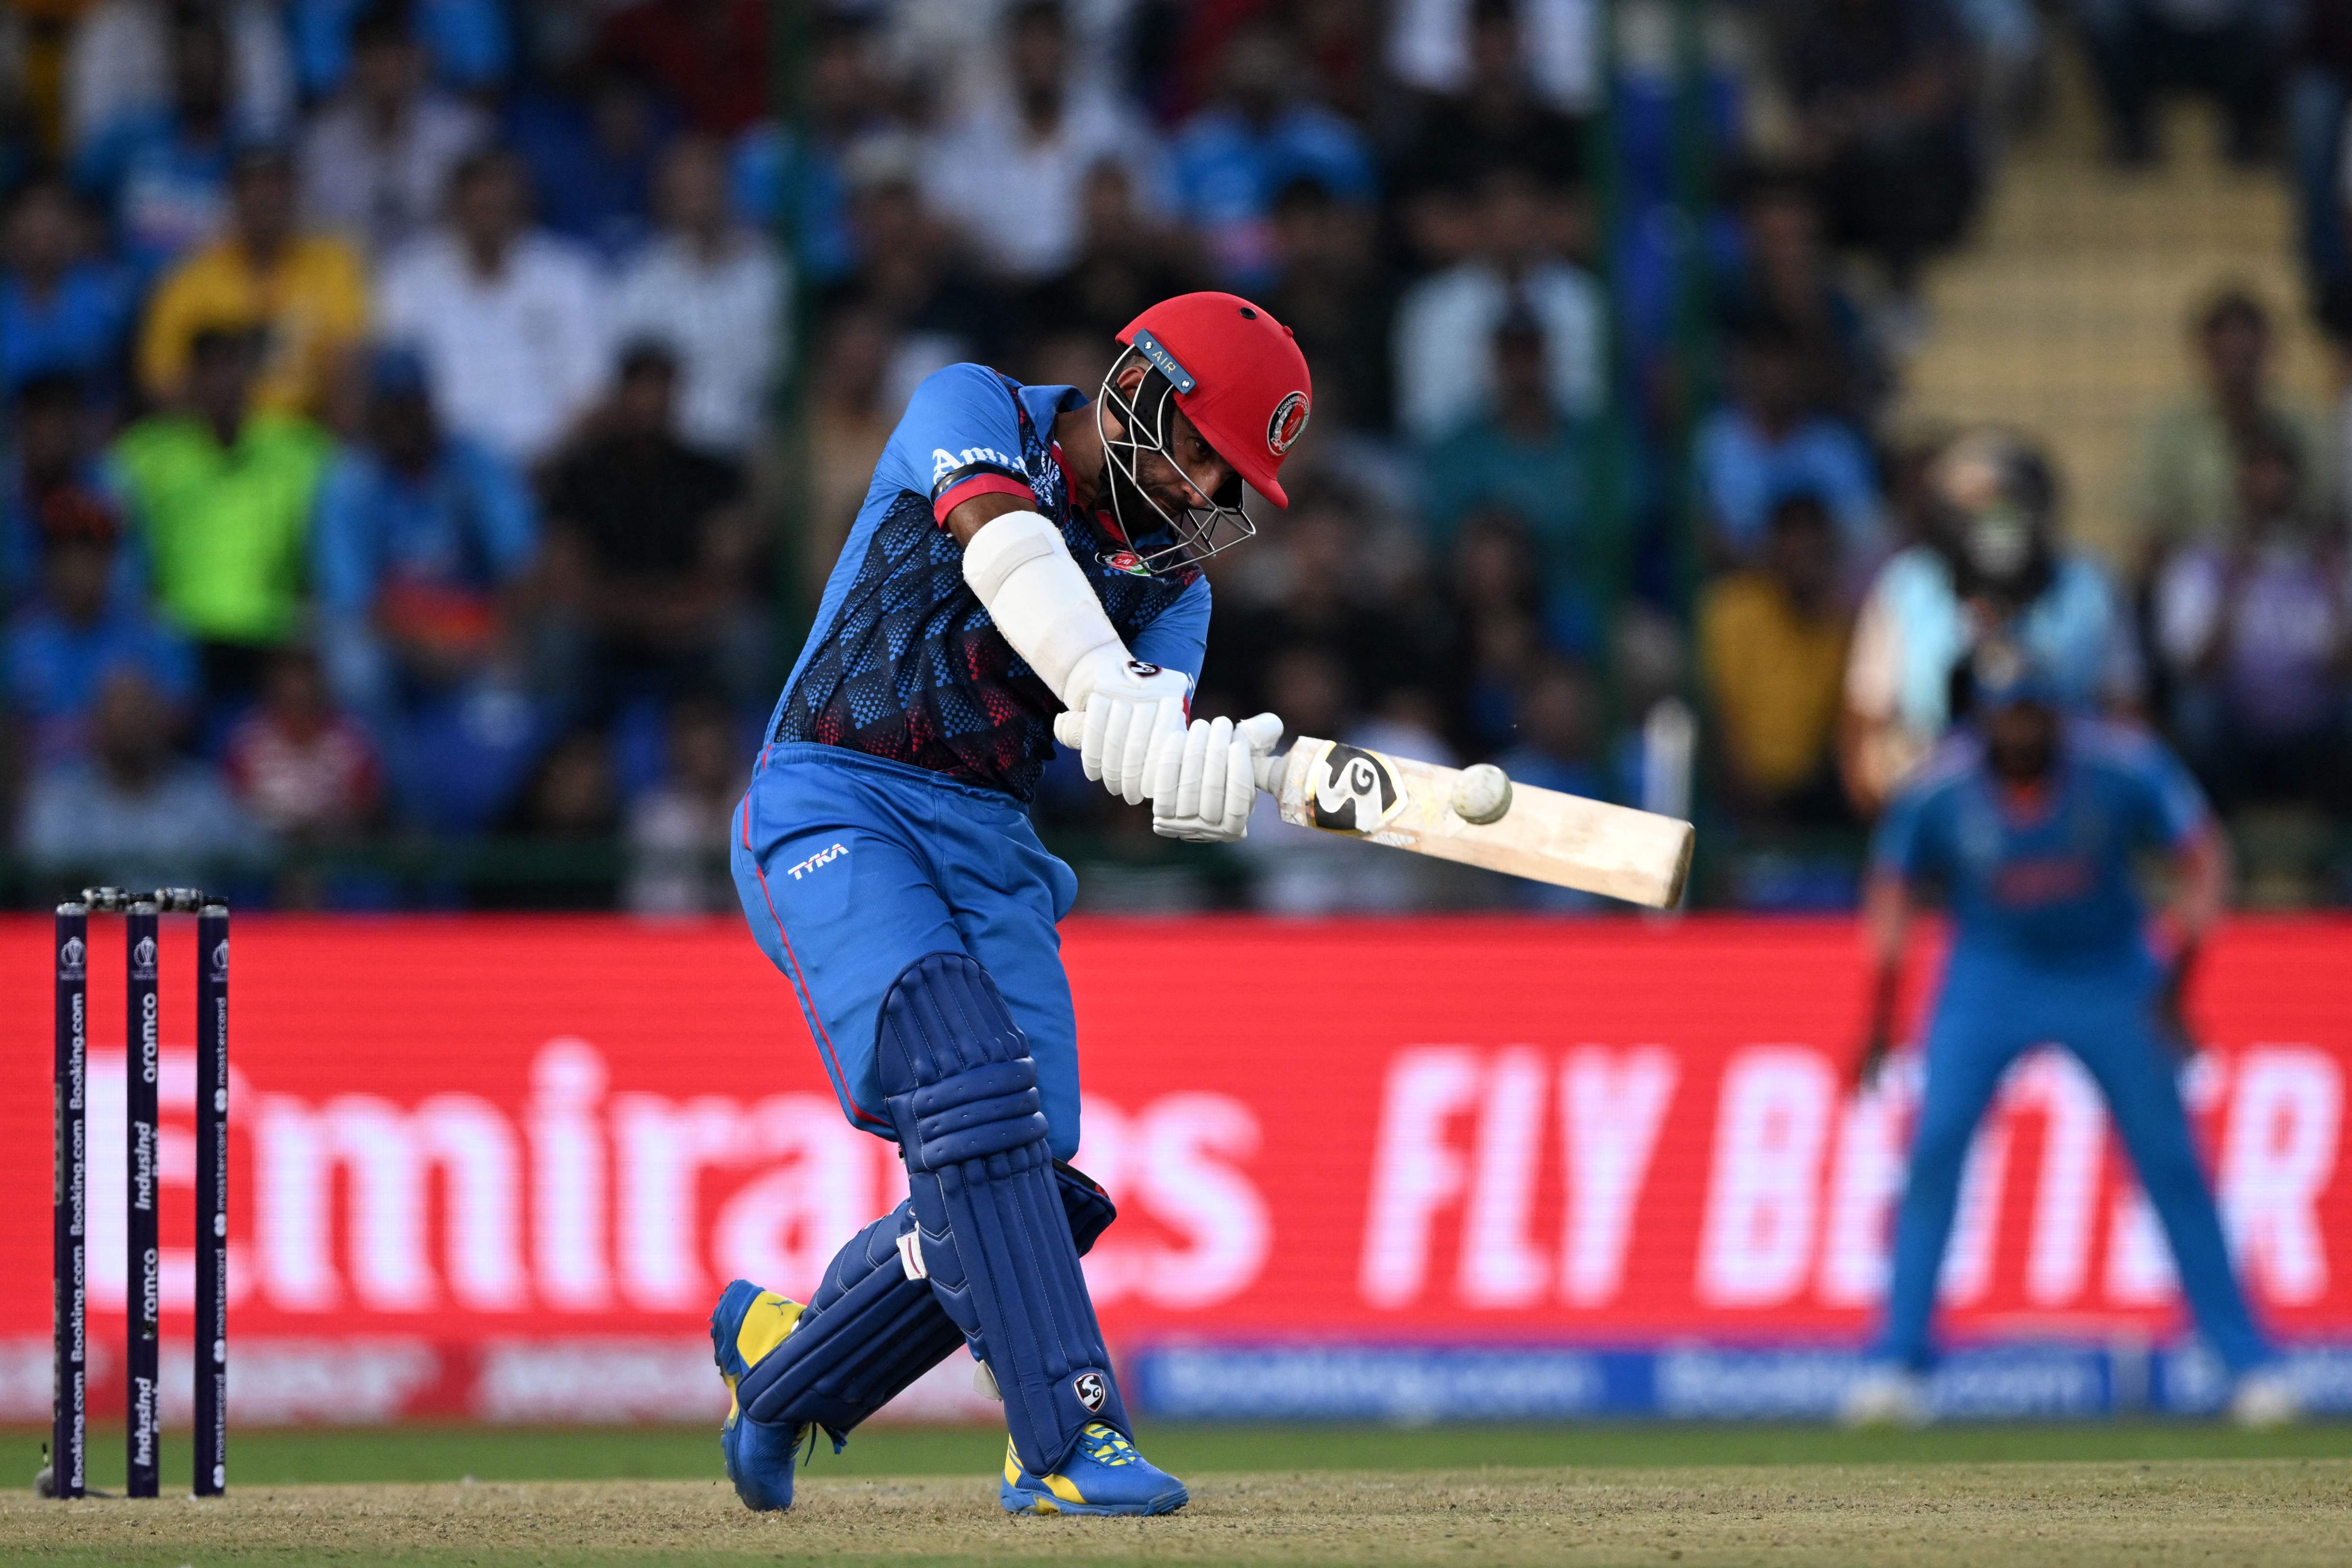 Hashmatullah Shahidi scored 80 for Afghanistan after weathering an early batting collapse